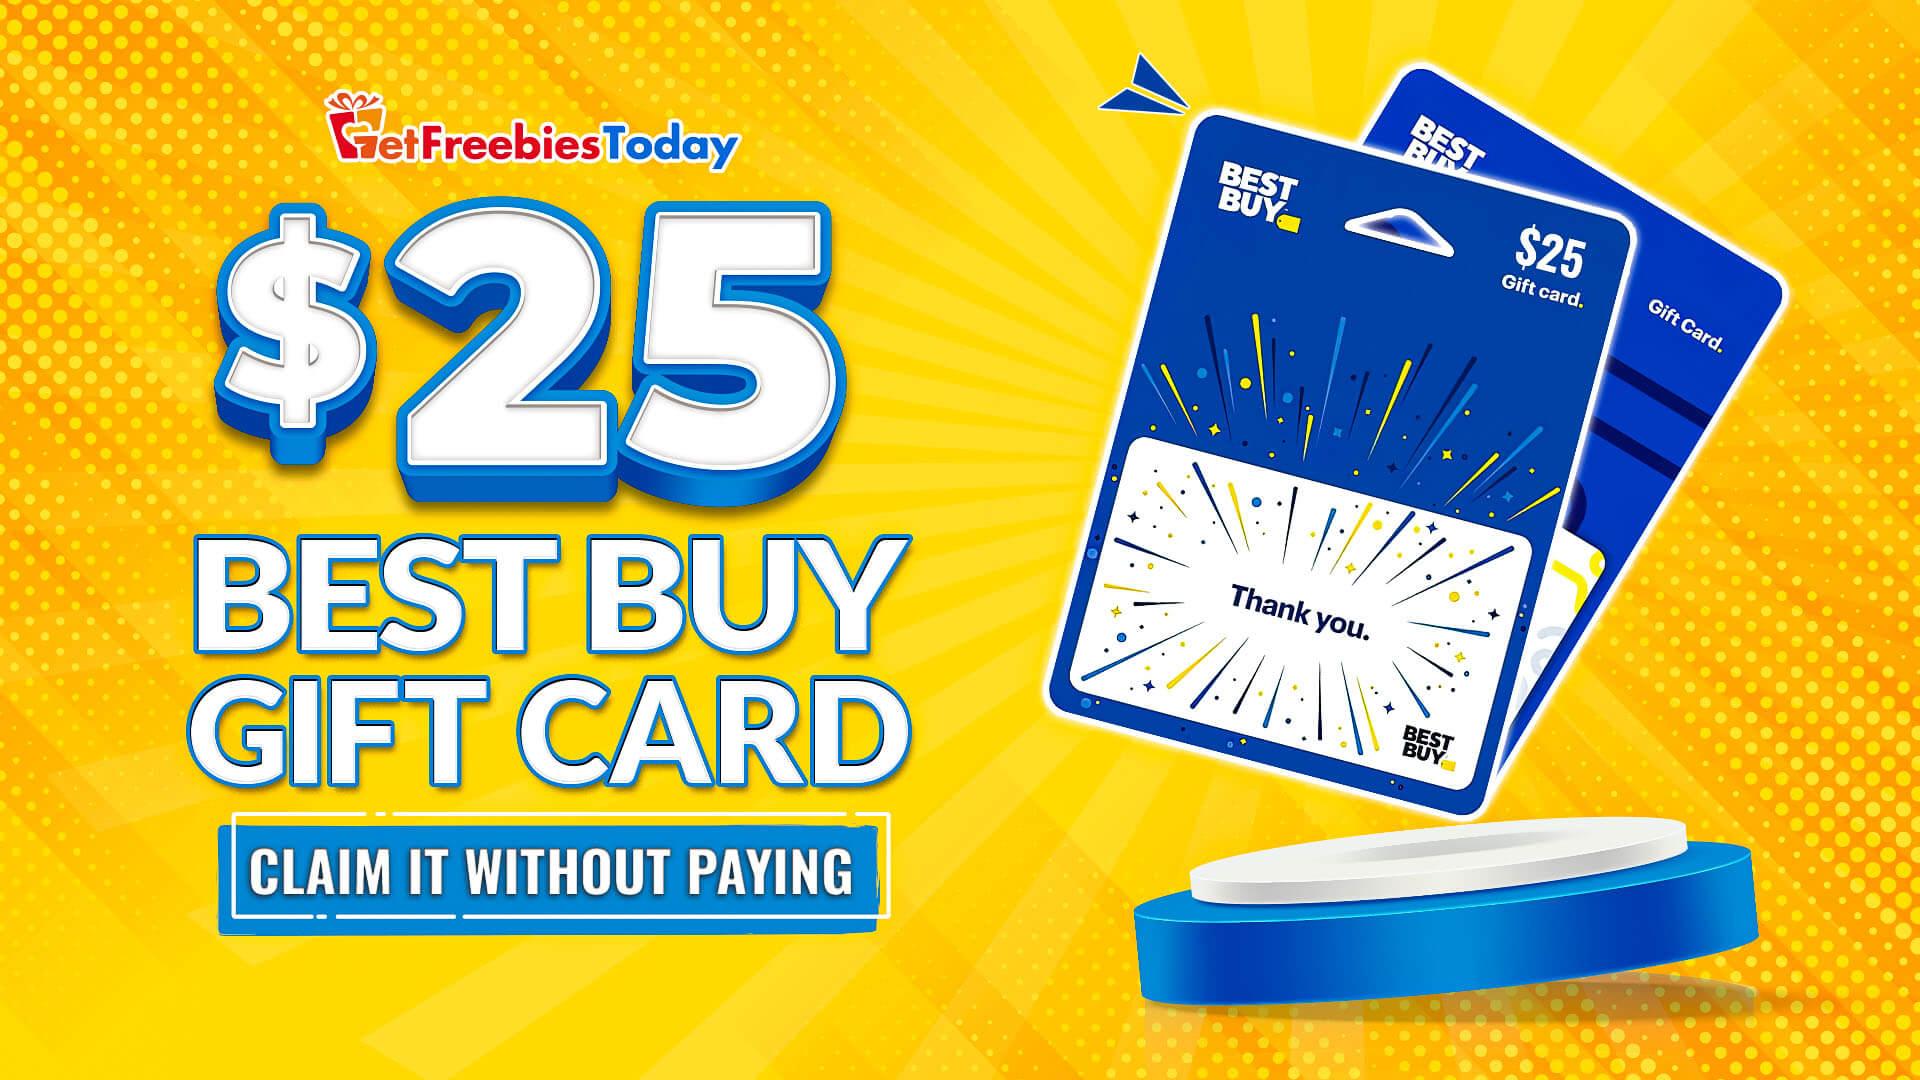 Get $25 Best Buy Gift Card Without Costs